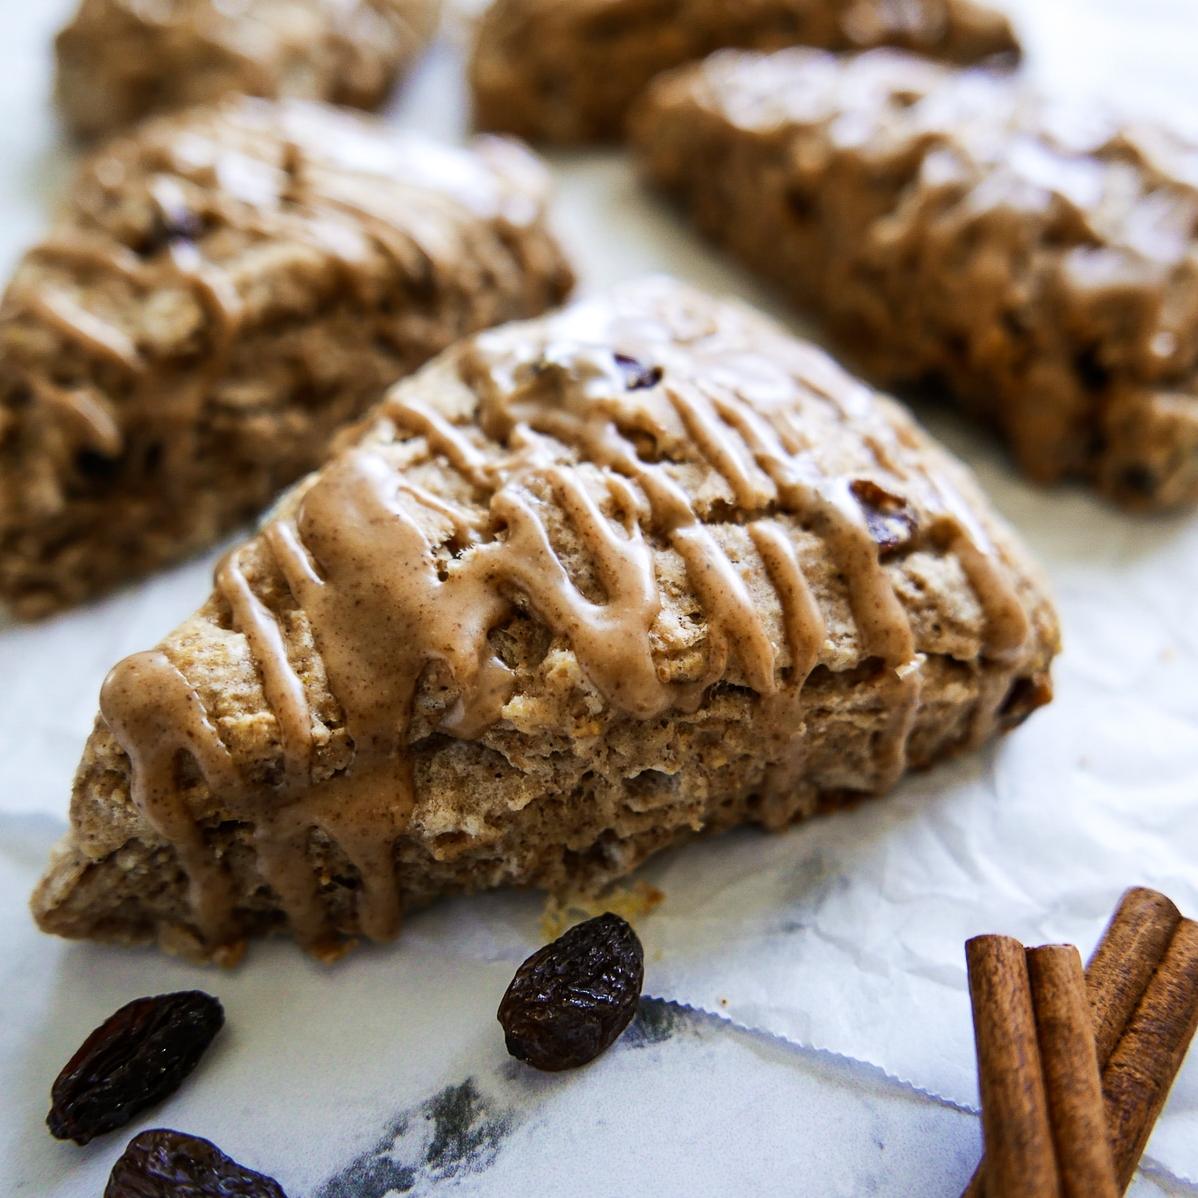  Make your coworkers jealous with these delicious treats for your morning coffee break